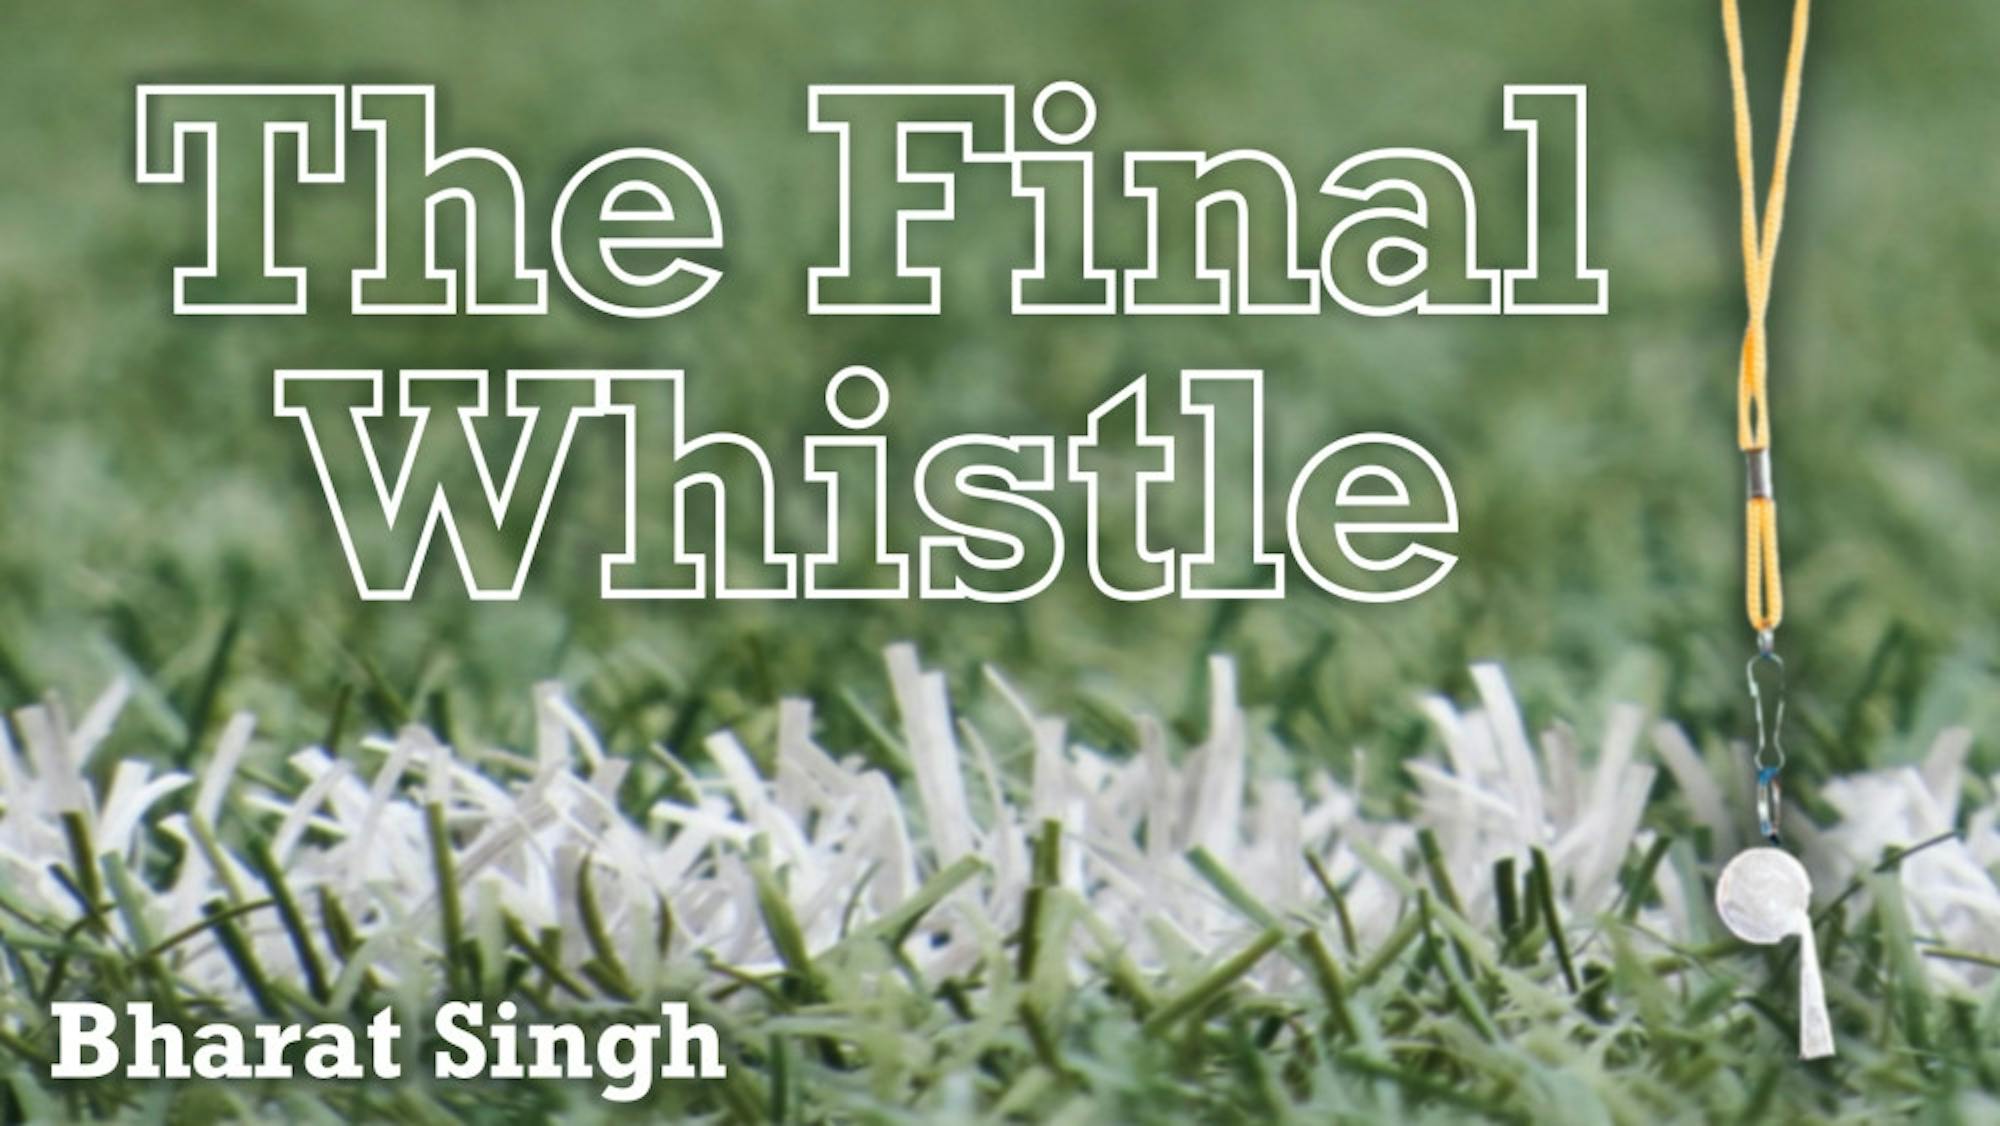 The-Final-Whistle-Graphic